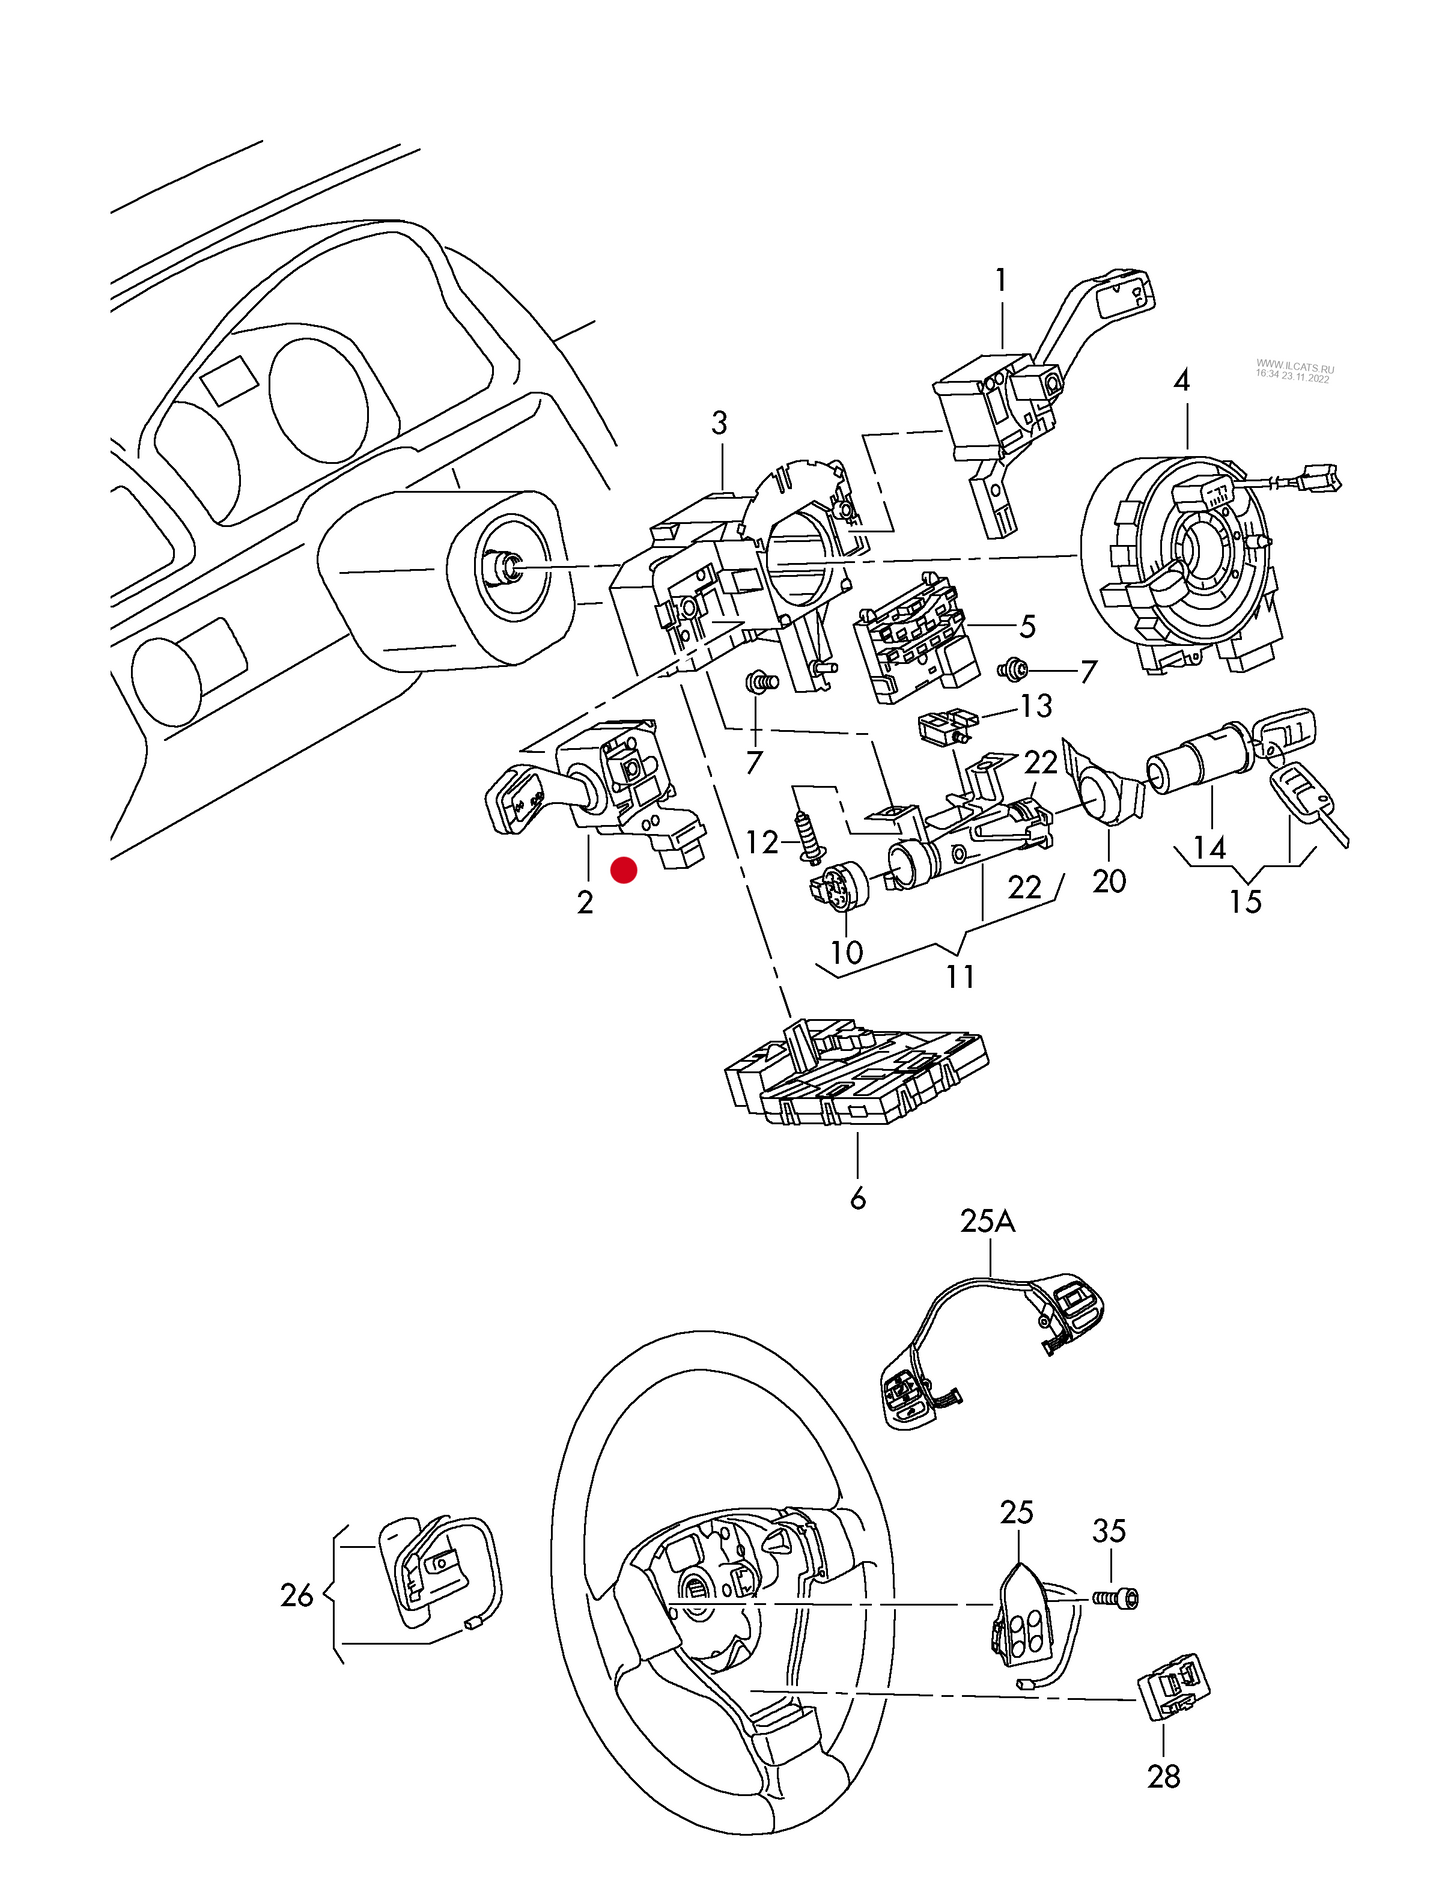 (2) 110111 MEYLE switch for turn signals,main and dip beam, headlight flasher and parking light